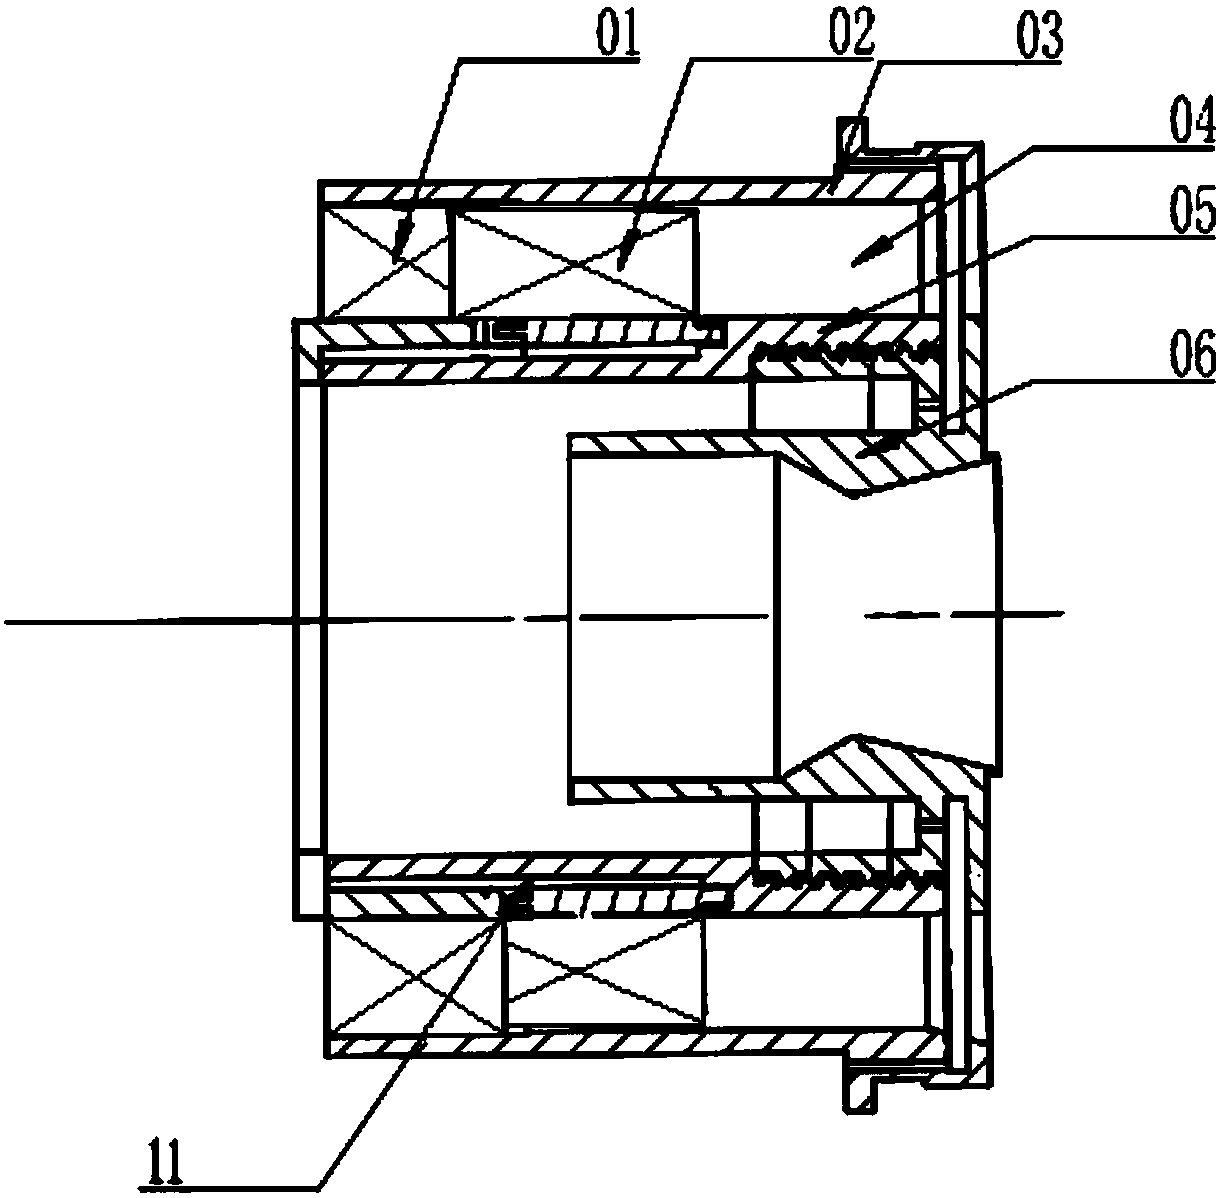 Low-emission combustion chamber head with main combustion stage adopting axial rotational flow pre-membrane plate matching with blade injection structure